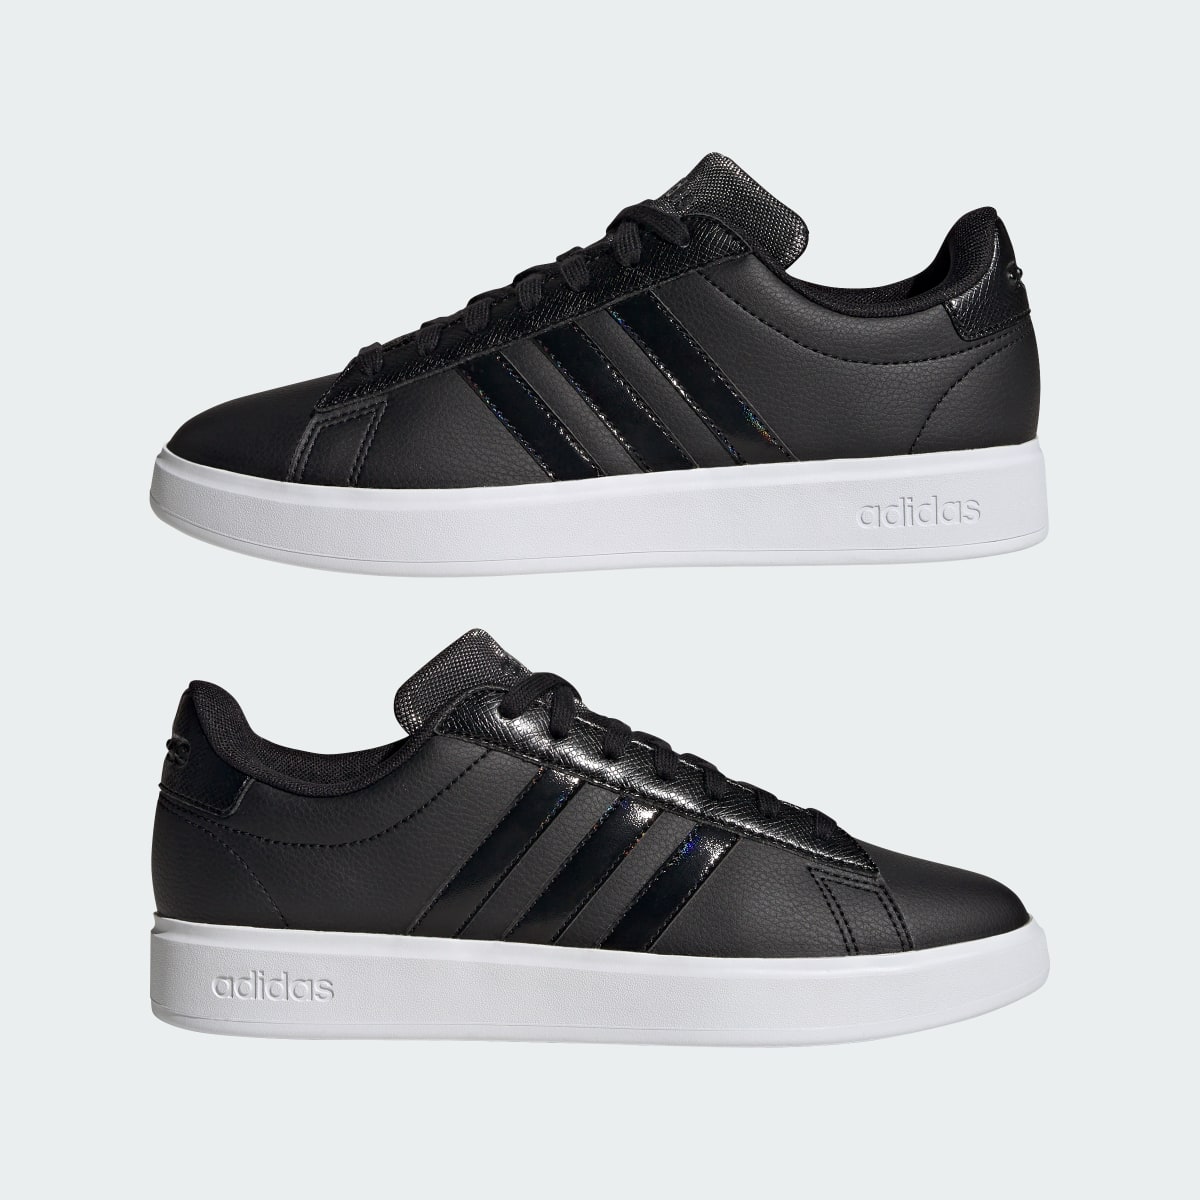 Adidas Grand Court 2.0 Shoes. 8